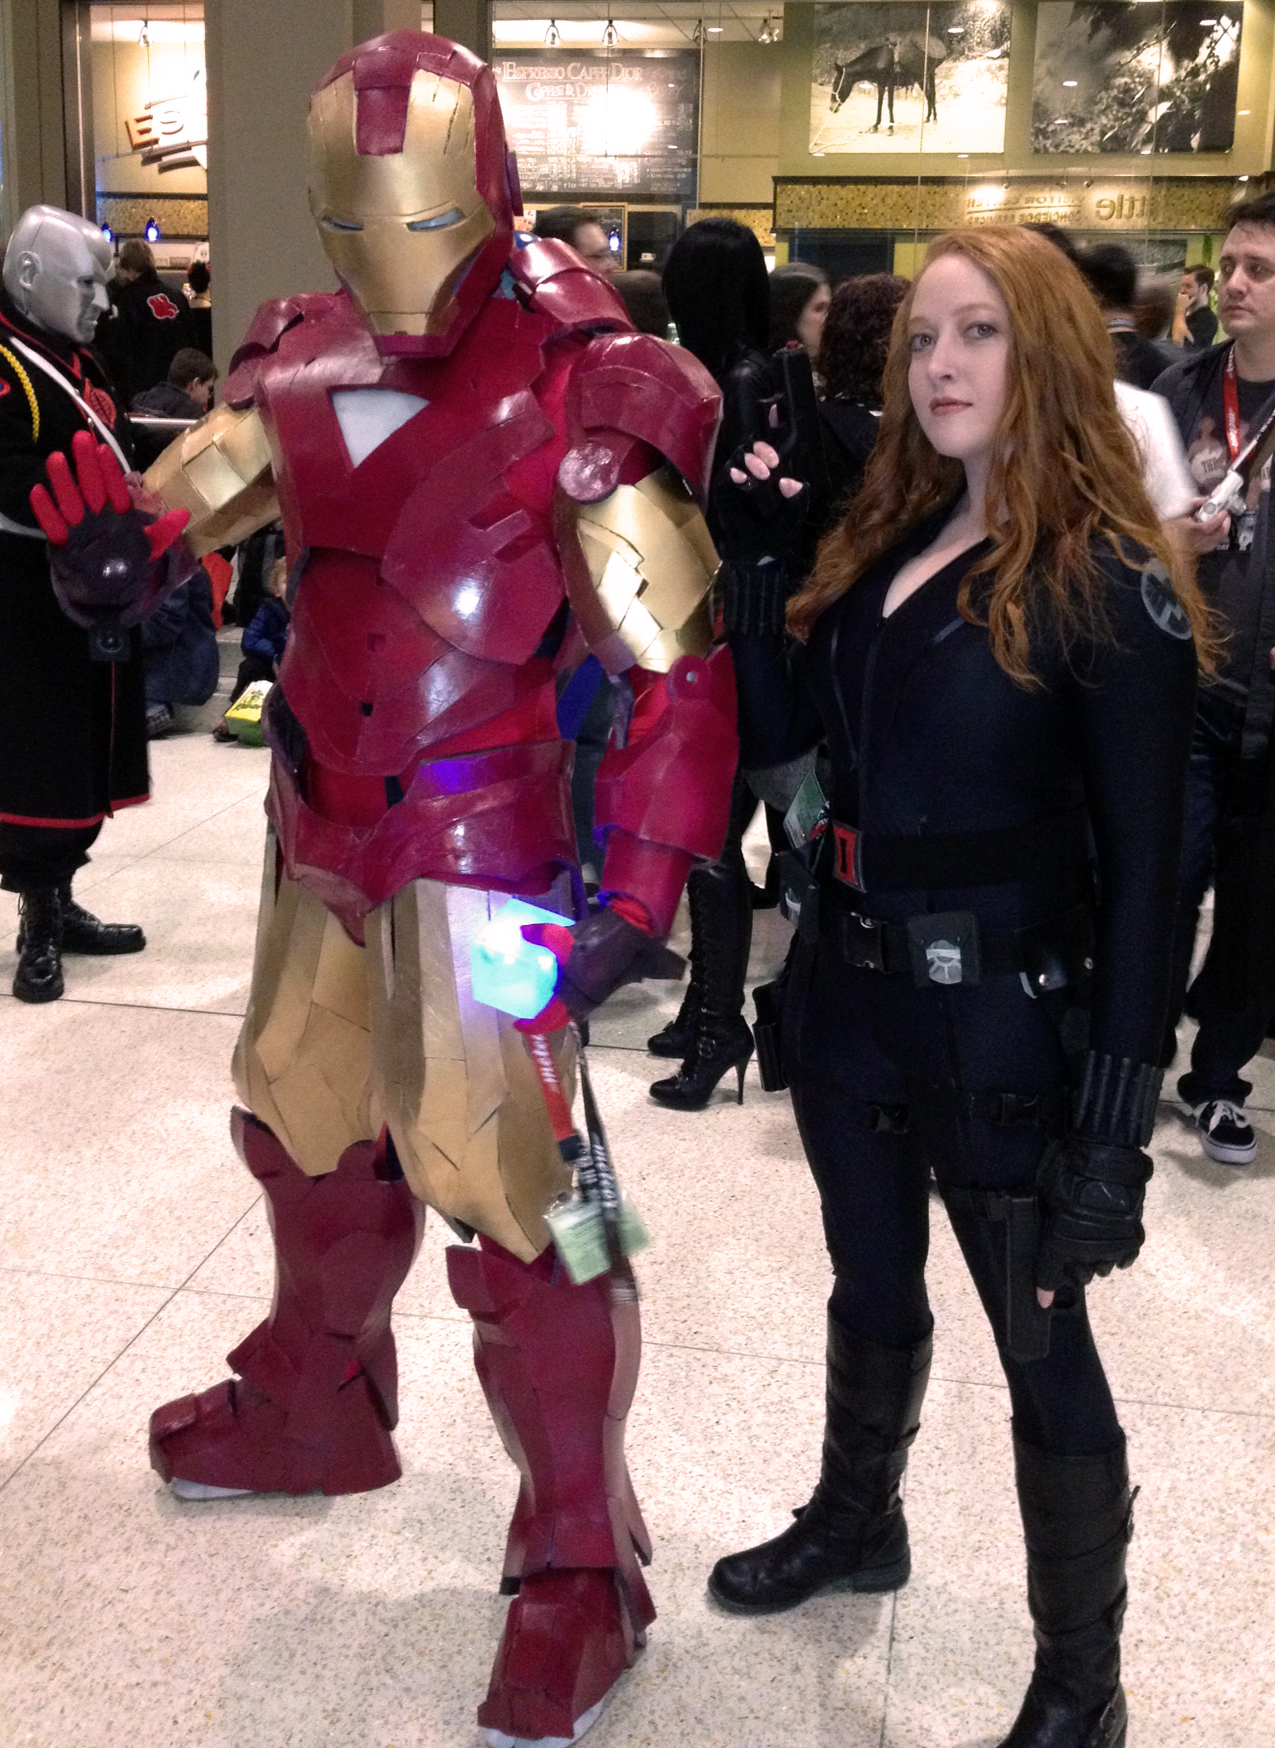 Black Widow (Avengers) with unknown Iron Man (who was an awesome gent) - Emerald City Comic Con 2013